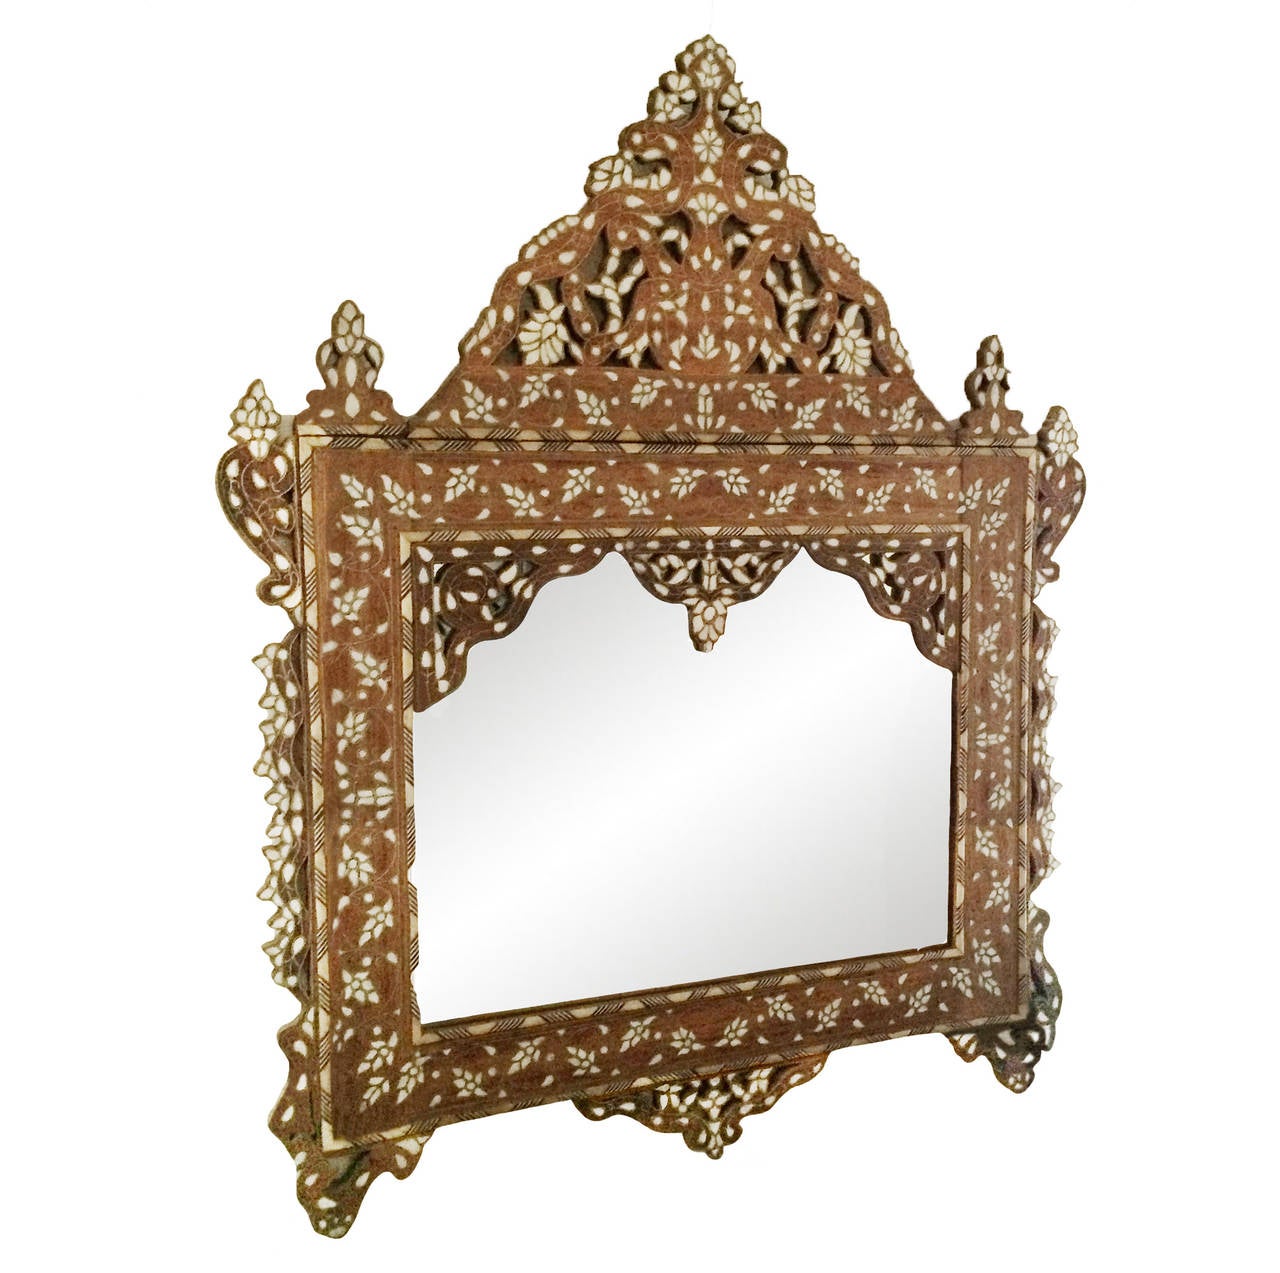 19th century exceptional Syrian mother-of-pearl inlay mirror with a series of framed bone borders; scalloped cut-out details; center dome. Fabulous patina!